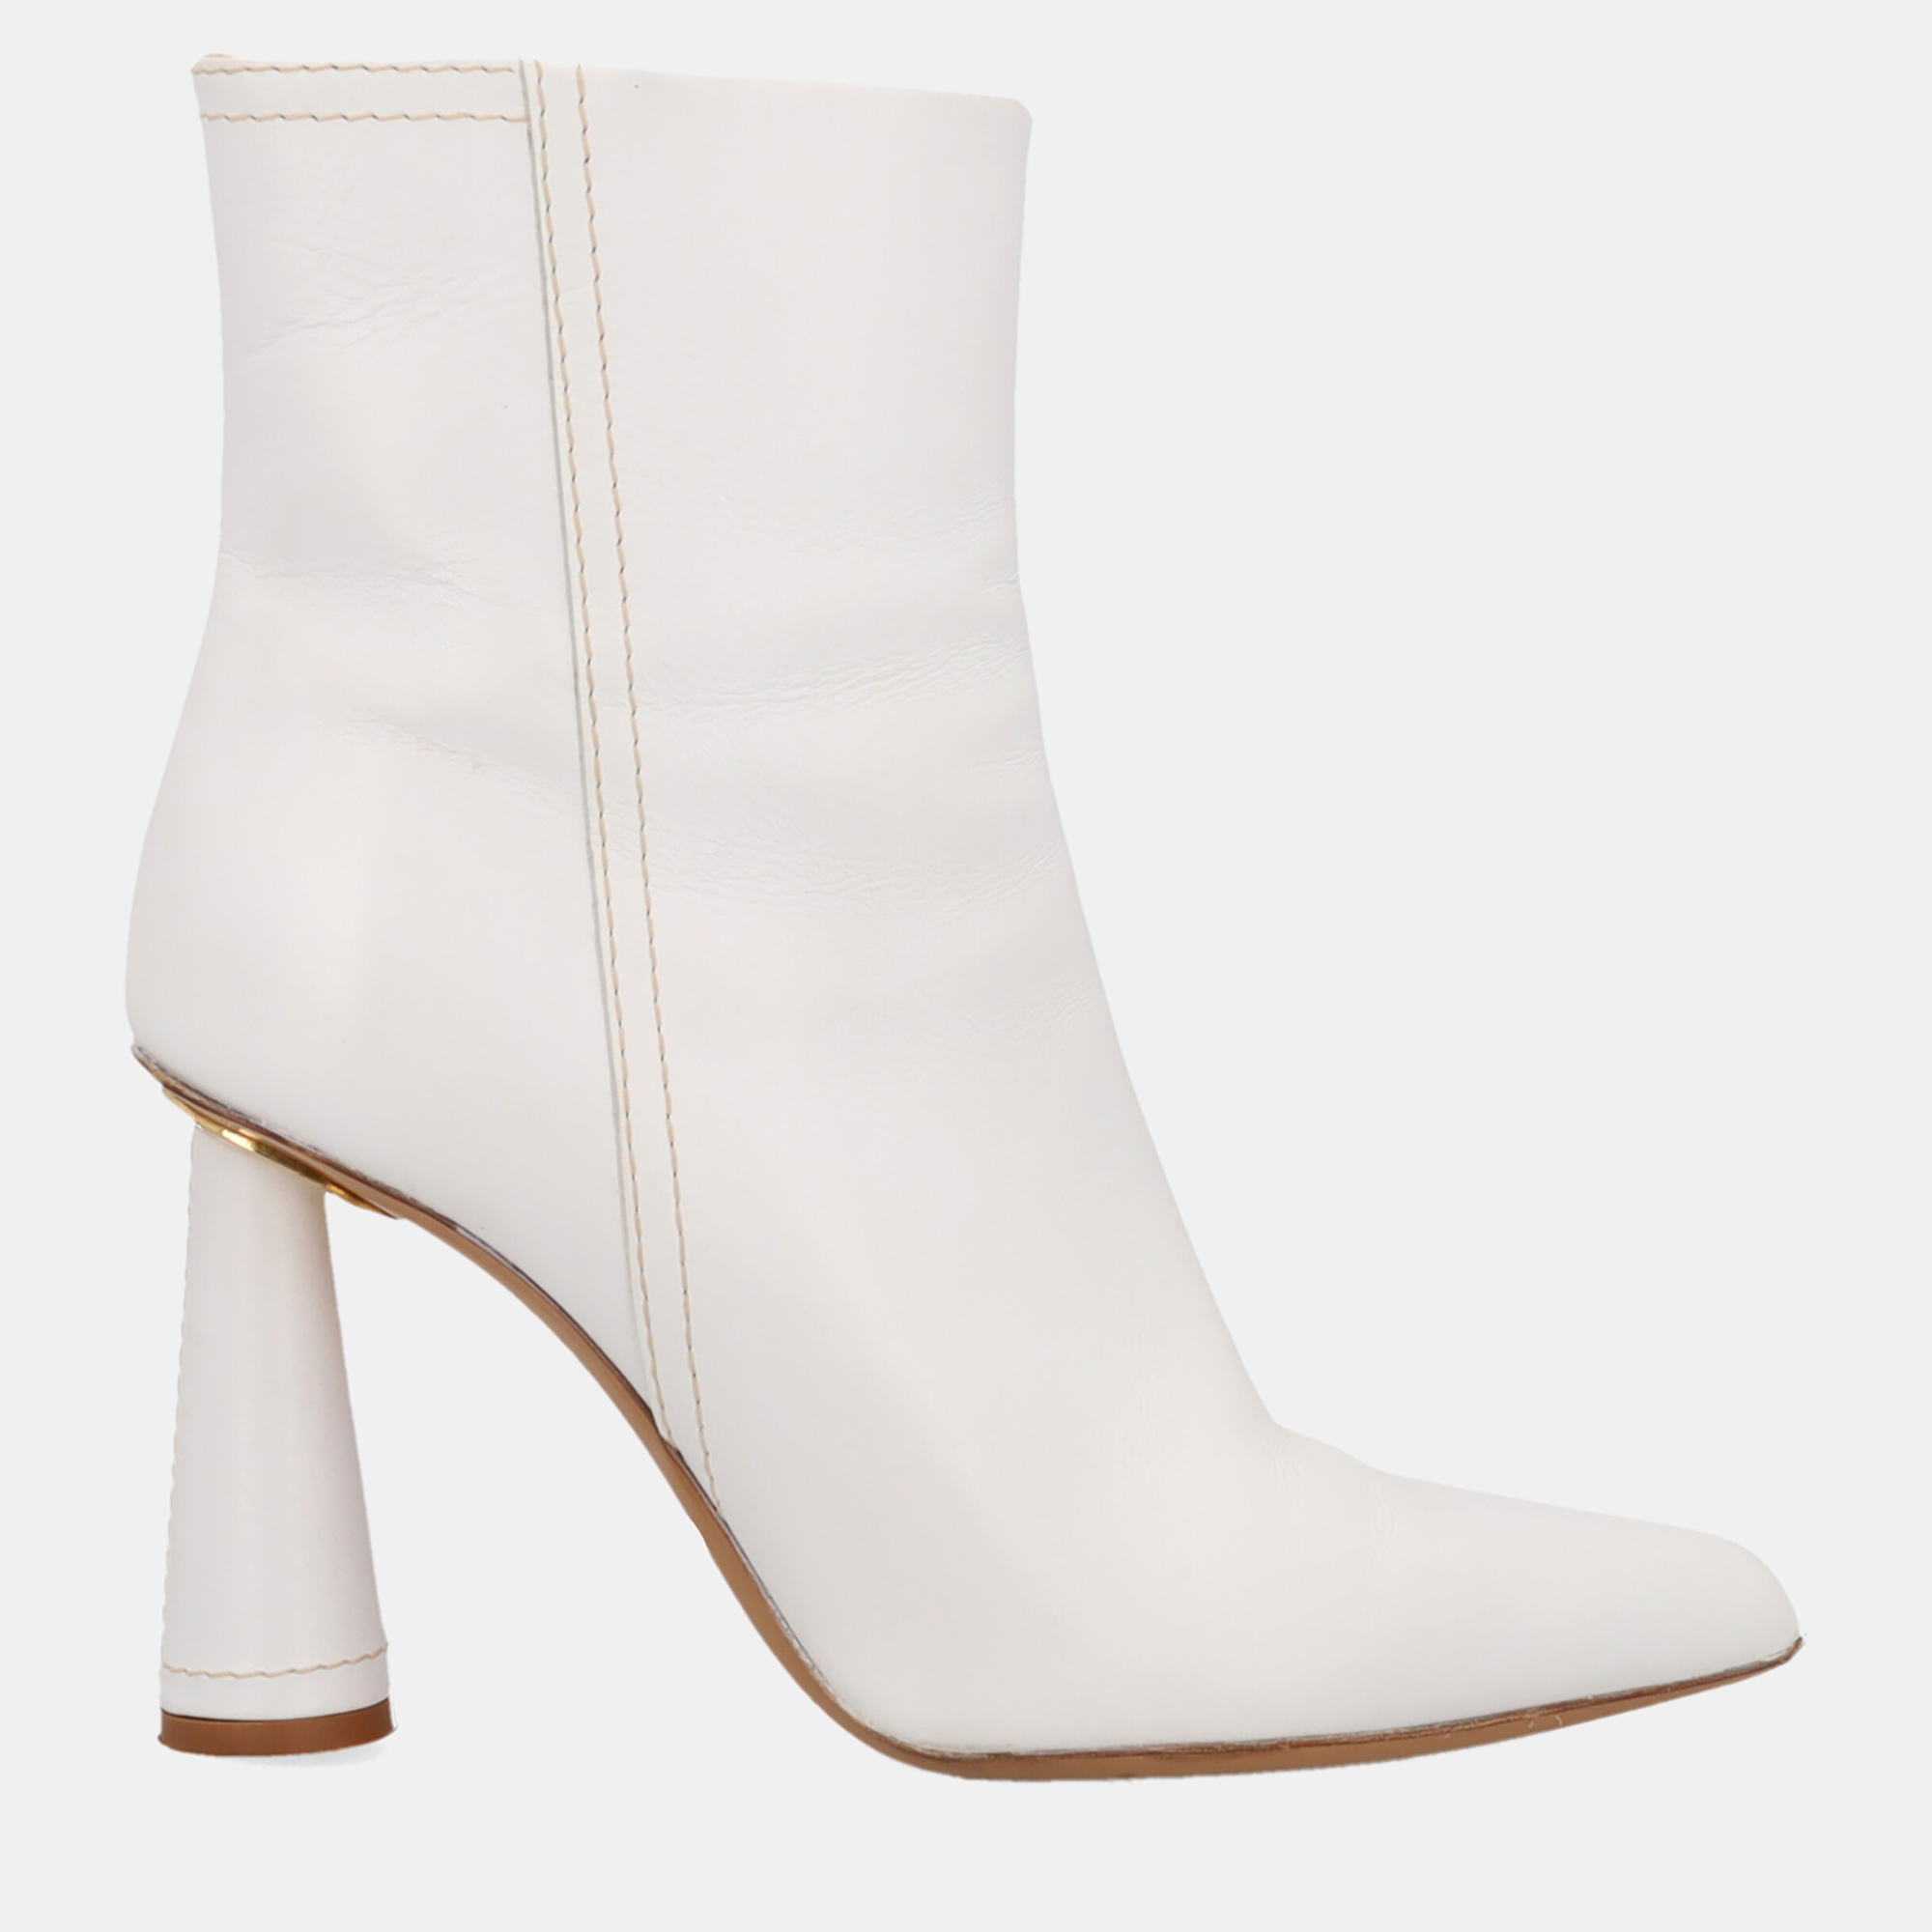 Jacquemus  Women's Leather Ankle Boots - White - EU 39